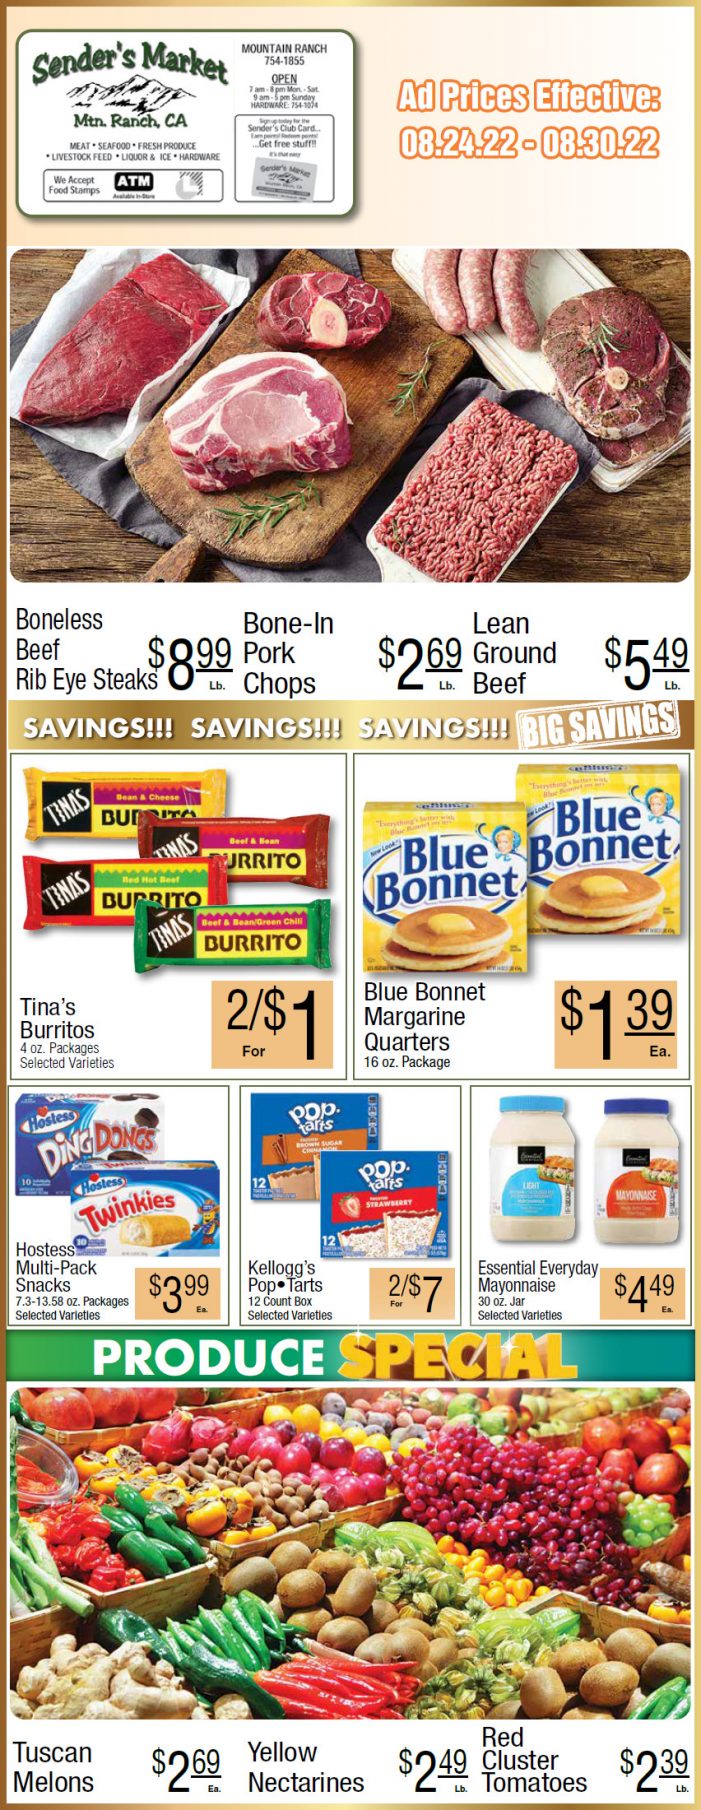 Sender’s Market Weekly Ad & Grocery Specials Through August 30th! Shop Local & Save!